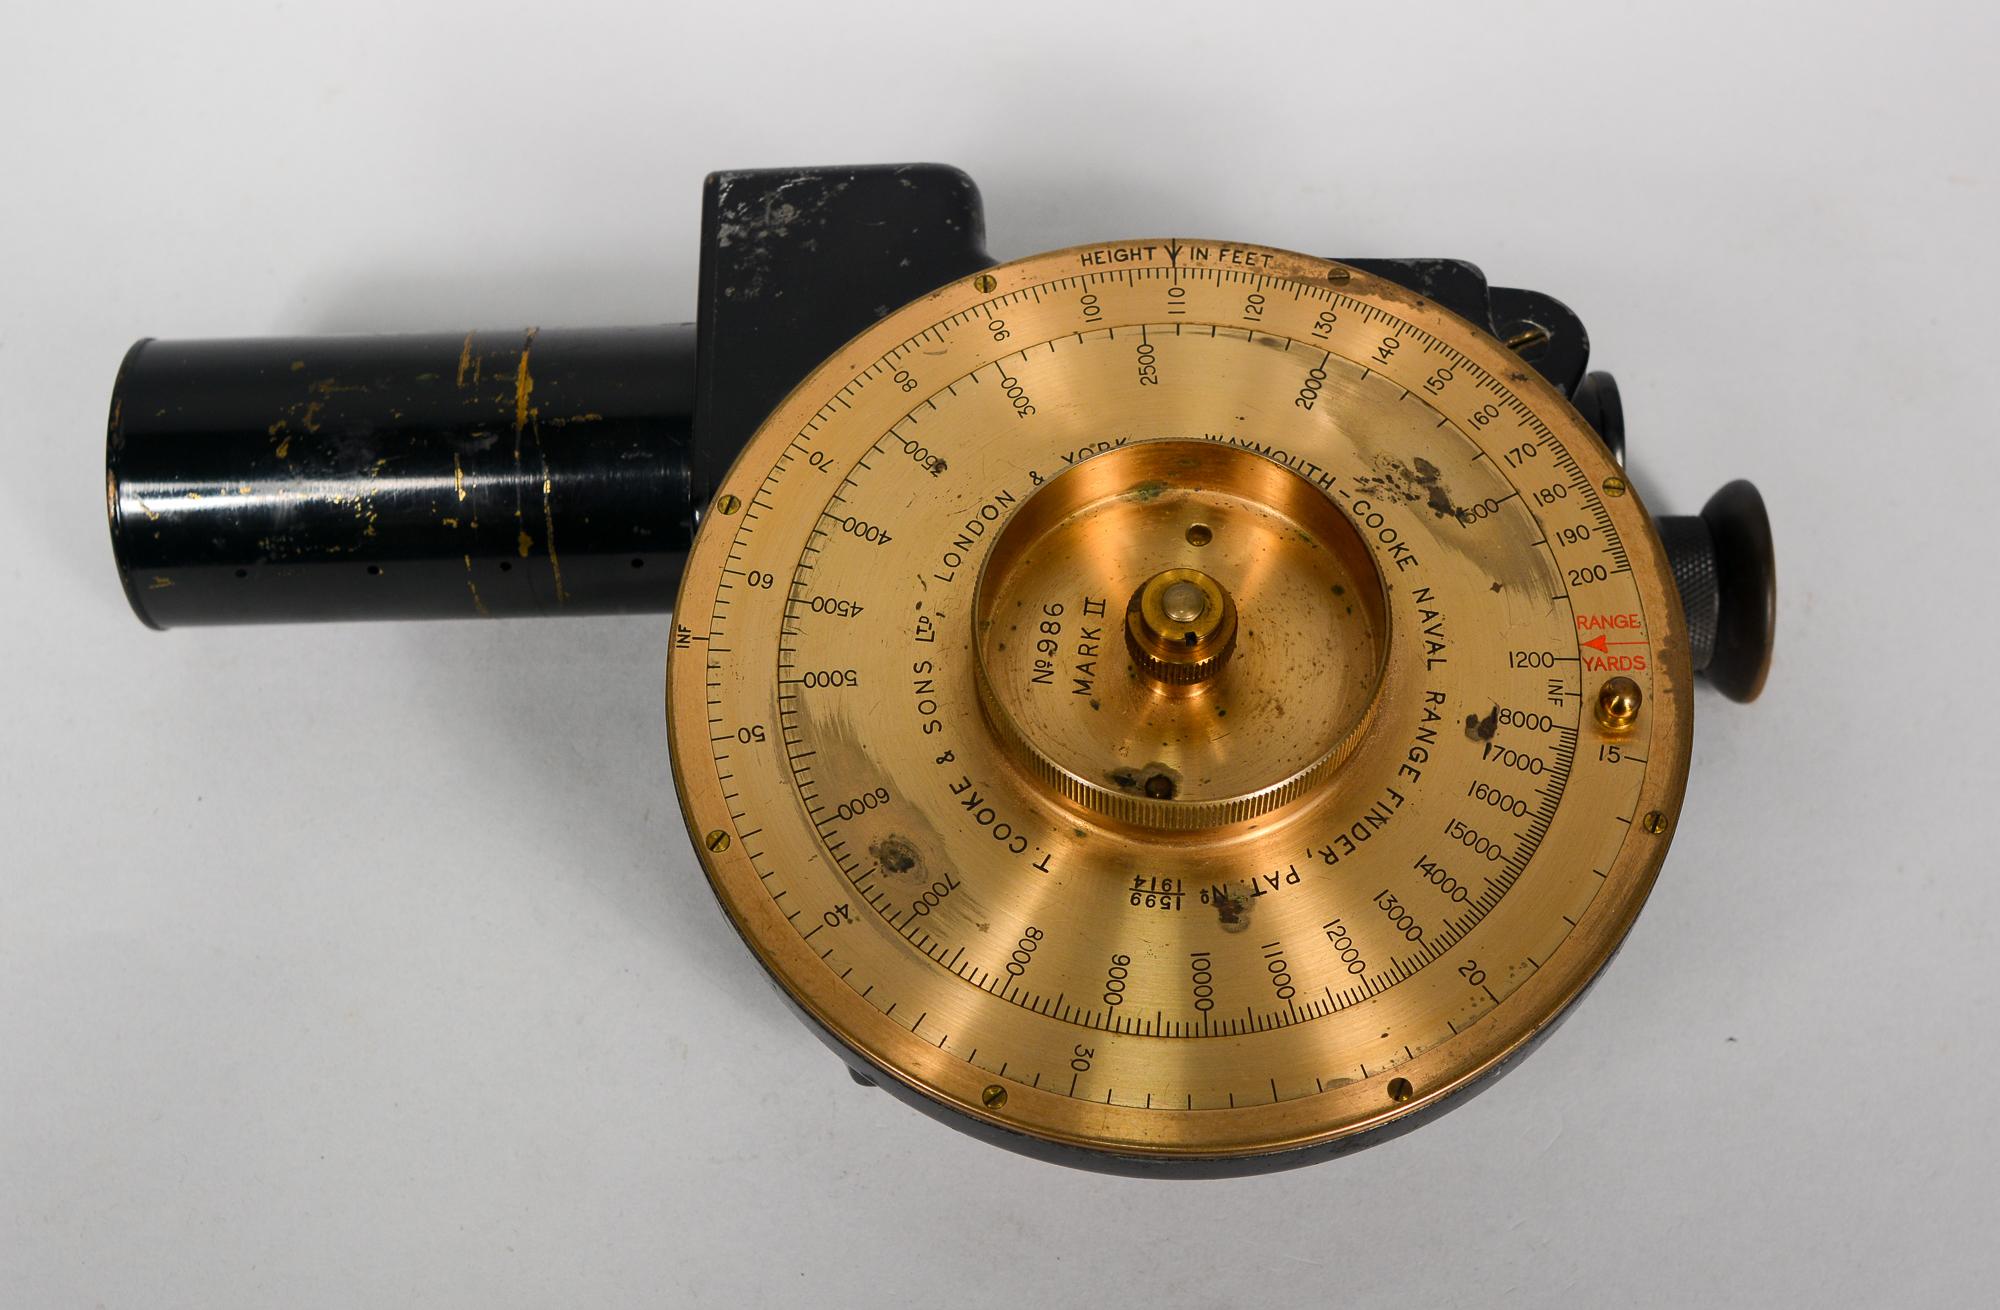 Naval range finder made by Waymouth-Cooke of London. These were based on the principals of a sextant range finder. They were patented in 1914. The Mark II like this one came out in 1917. The dimensions listed are for the case. This has two small